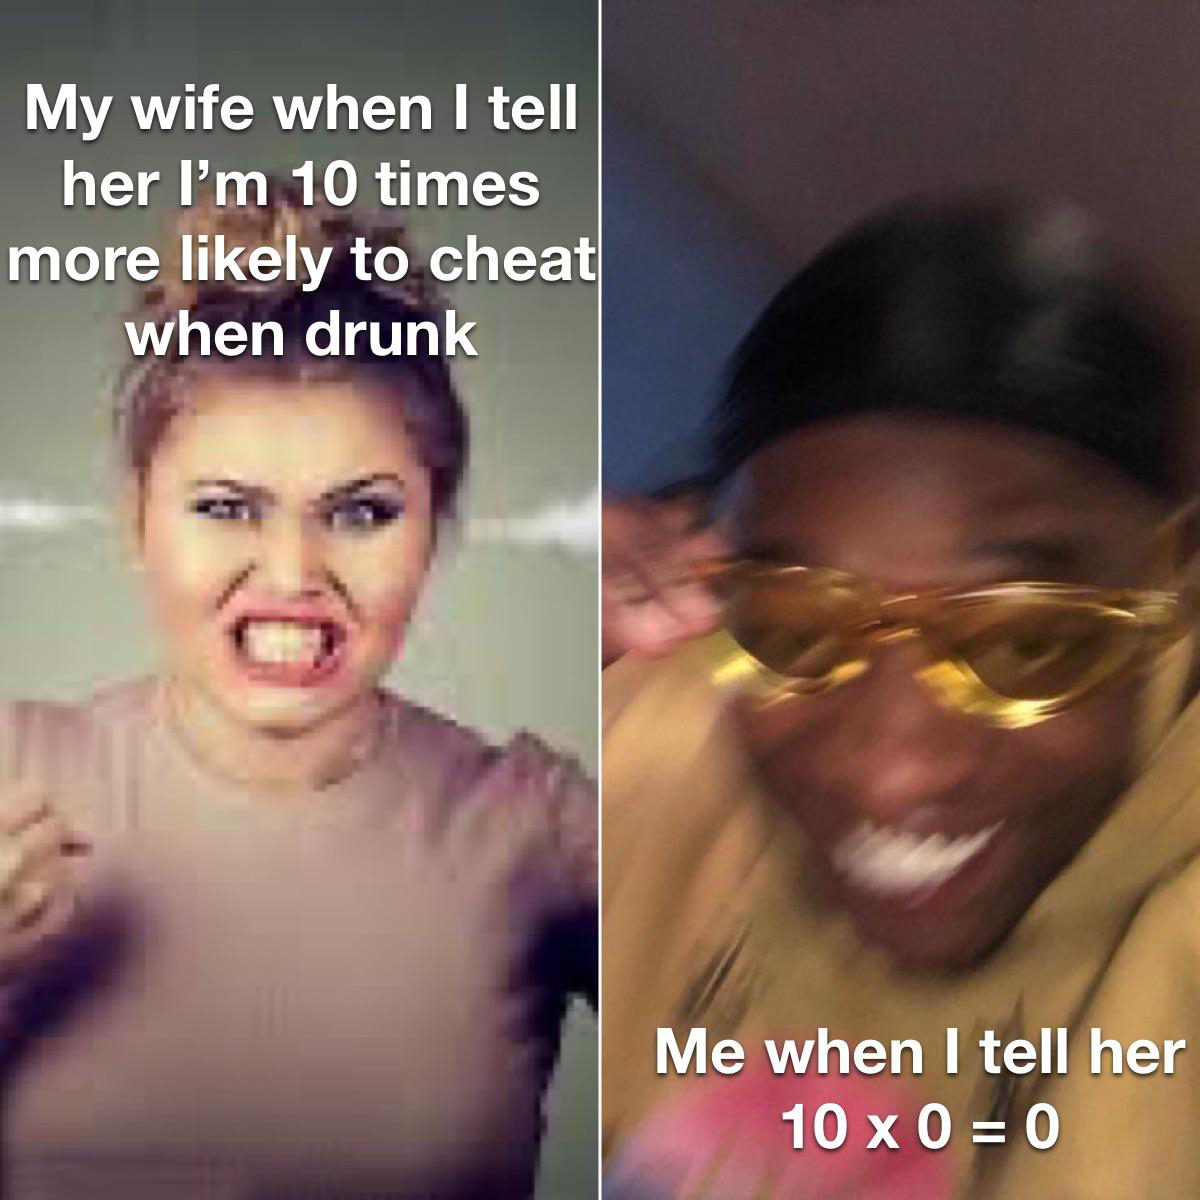 dank memes - funny memes - risky text meme - My wife when I tell her I'm 10 times more ly to cheat when drunk Me when I tell her 10x00